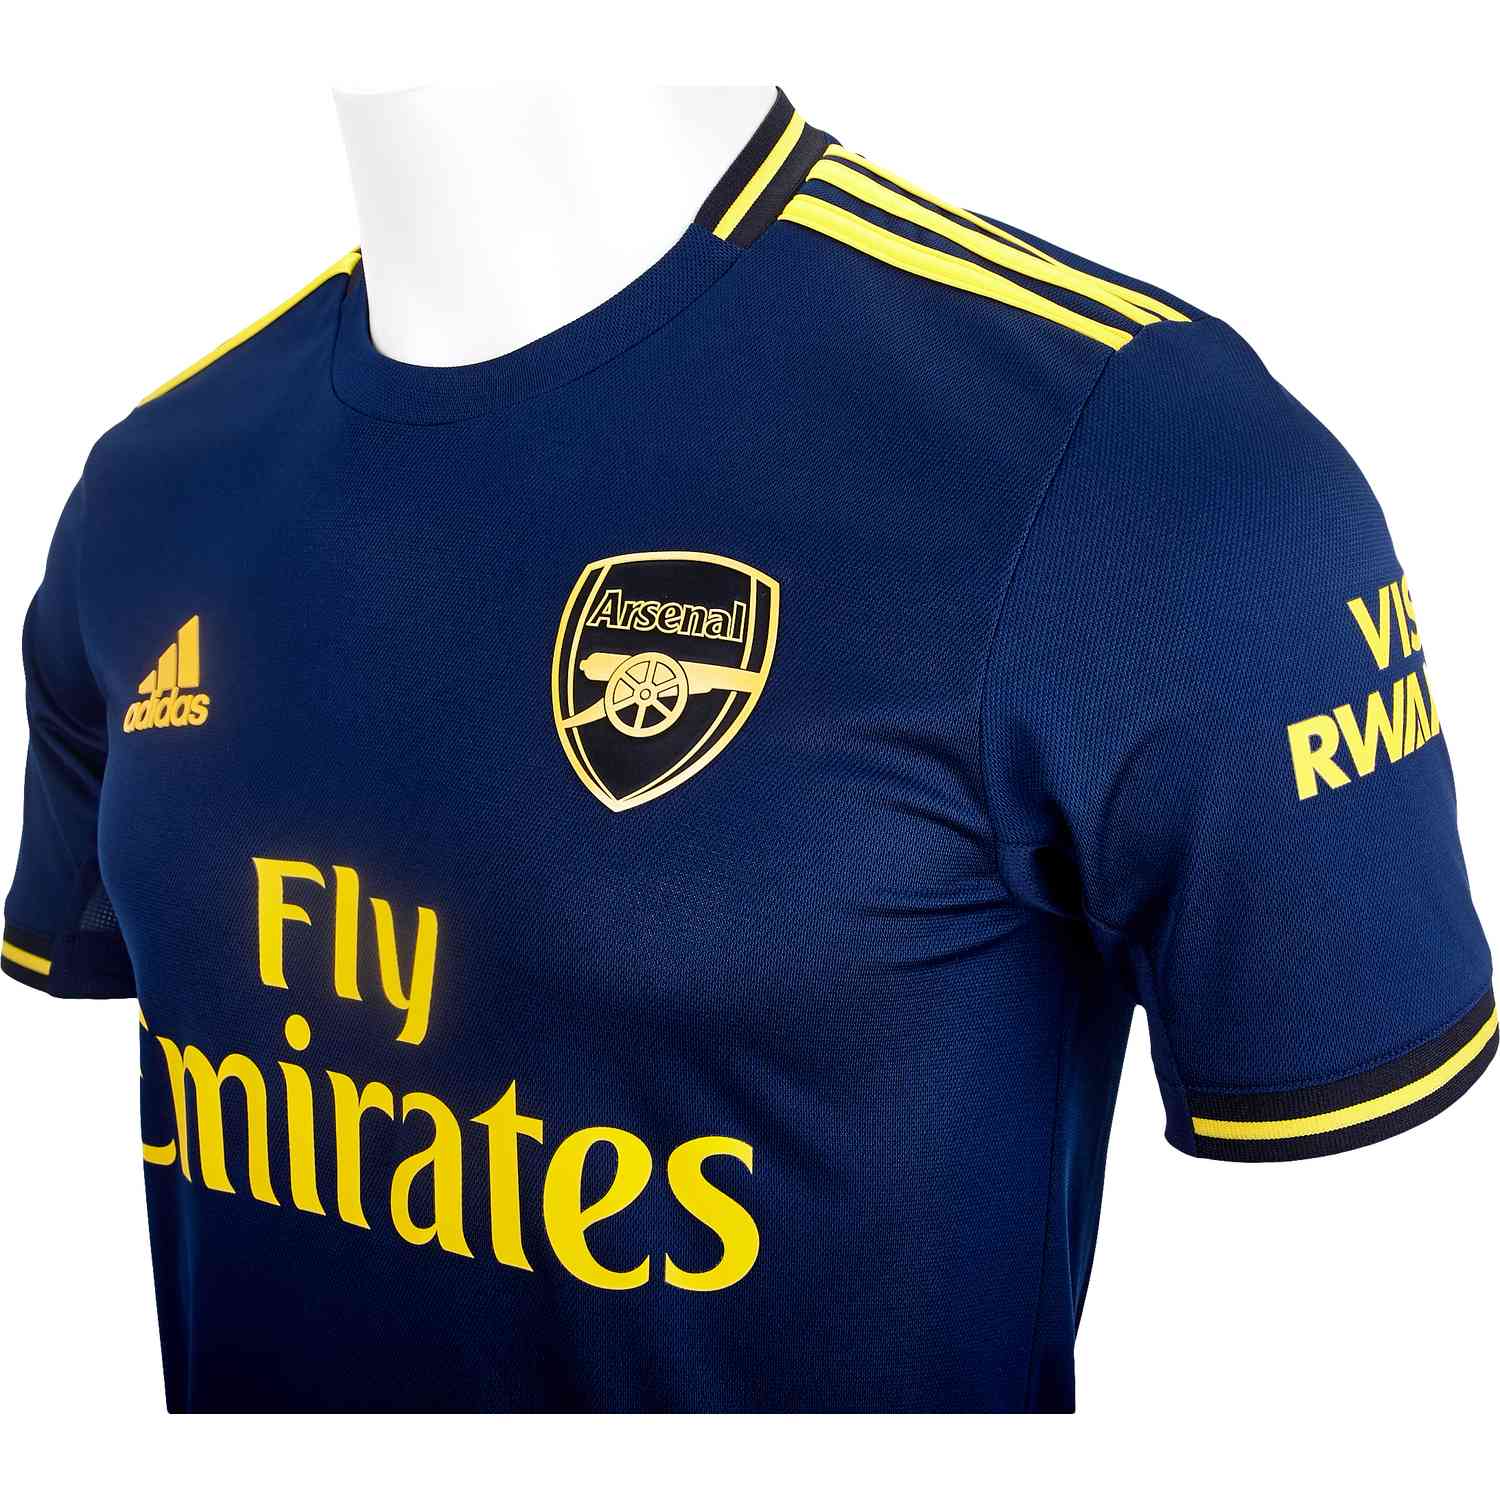 New Adidas Arsenal 2019/20 Men's Small 3rd Jersey Navy Blue Yellow Soccer S  NWT